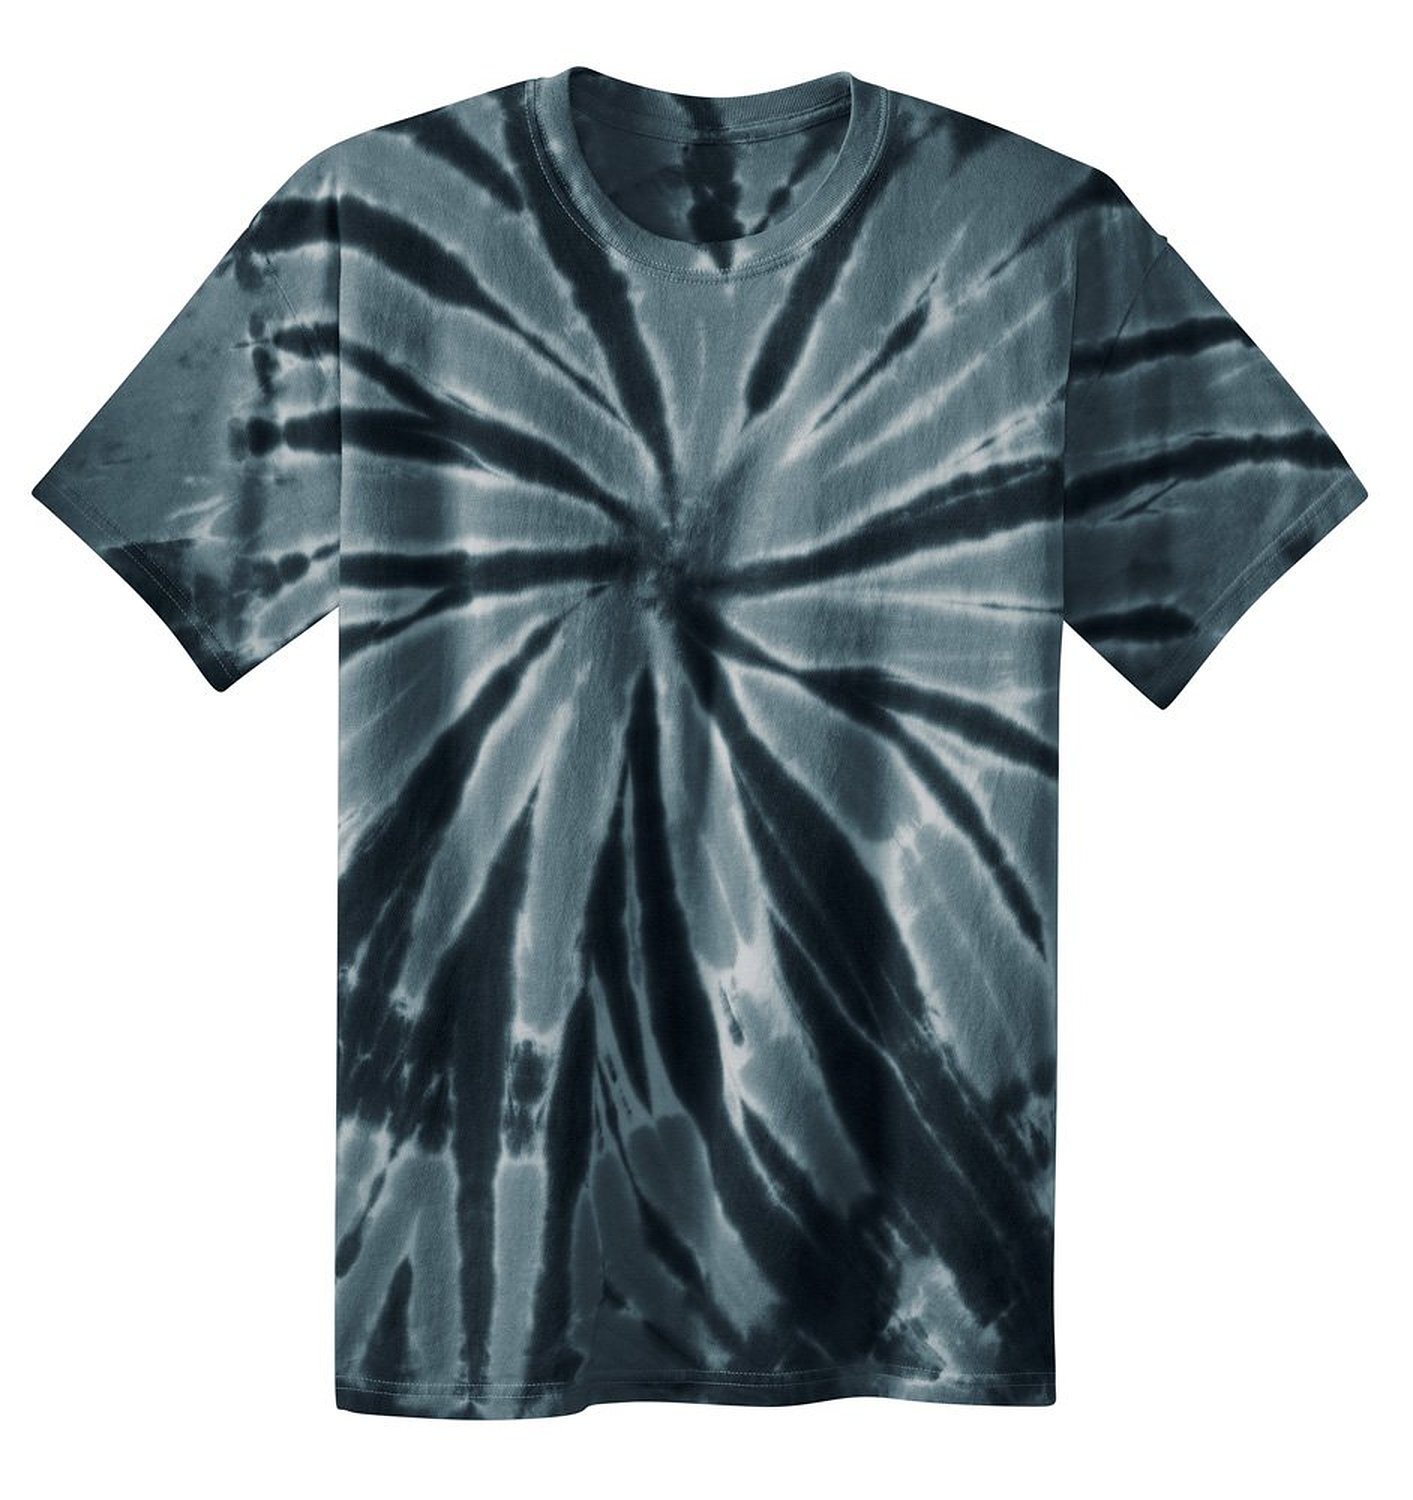 Tie and Dye